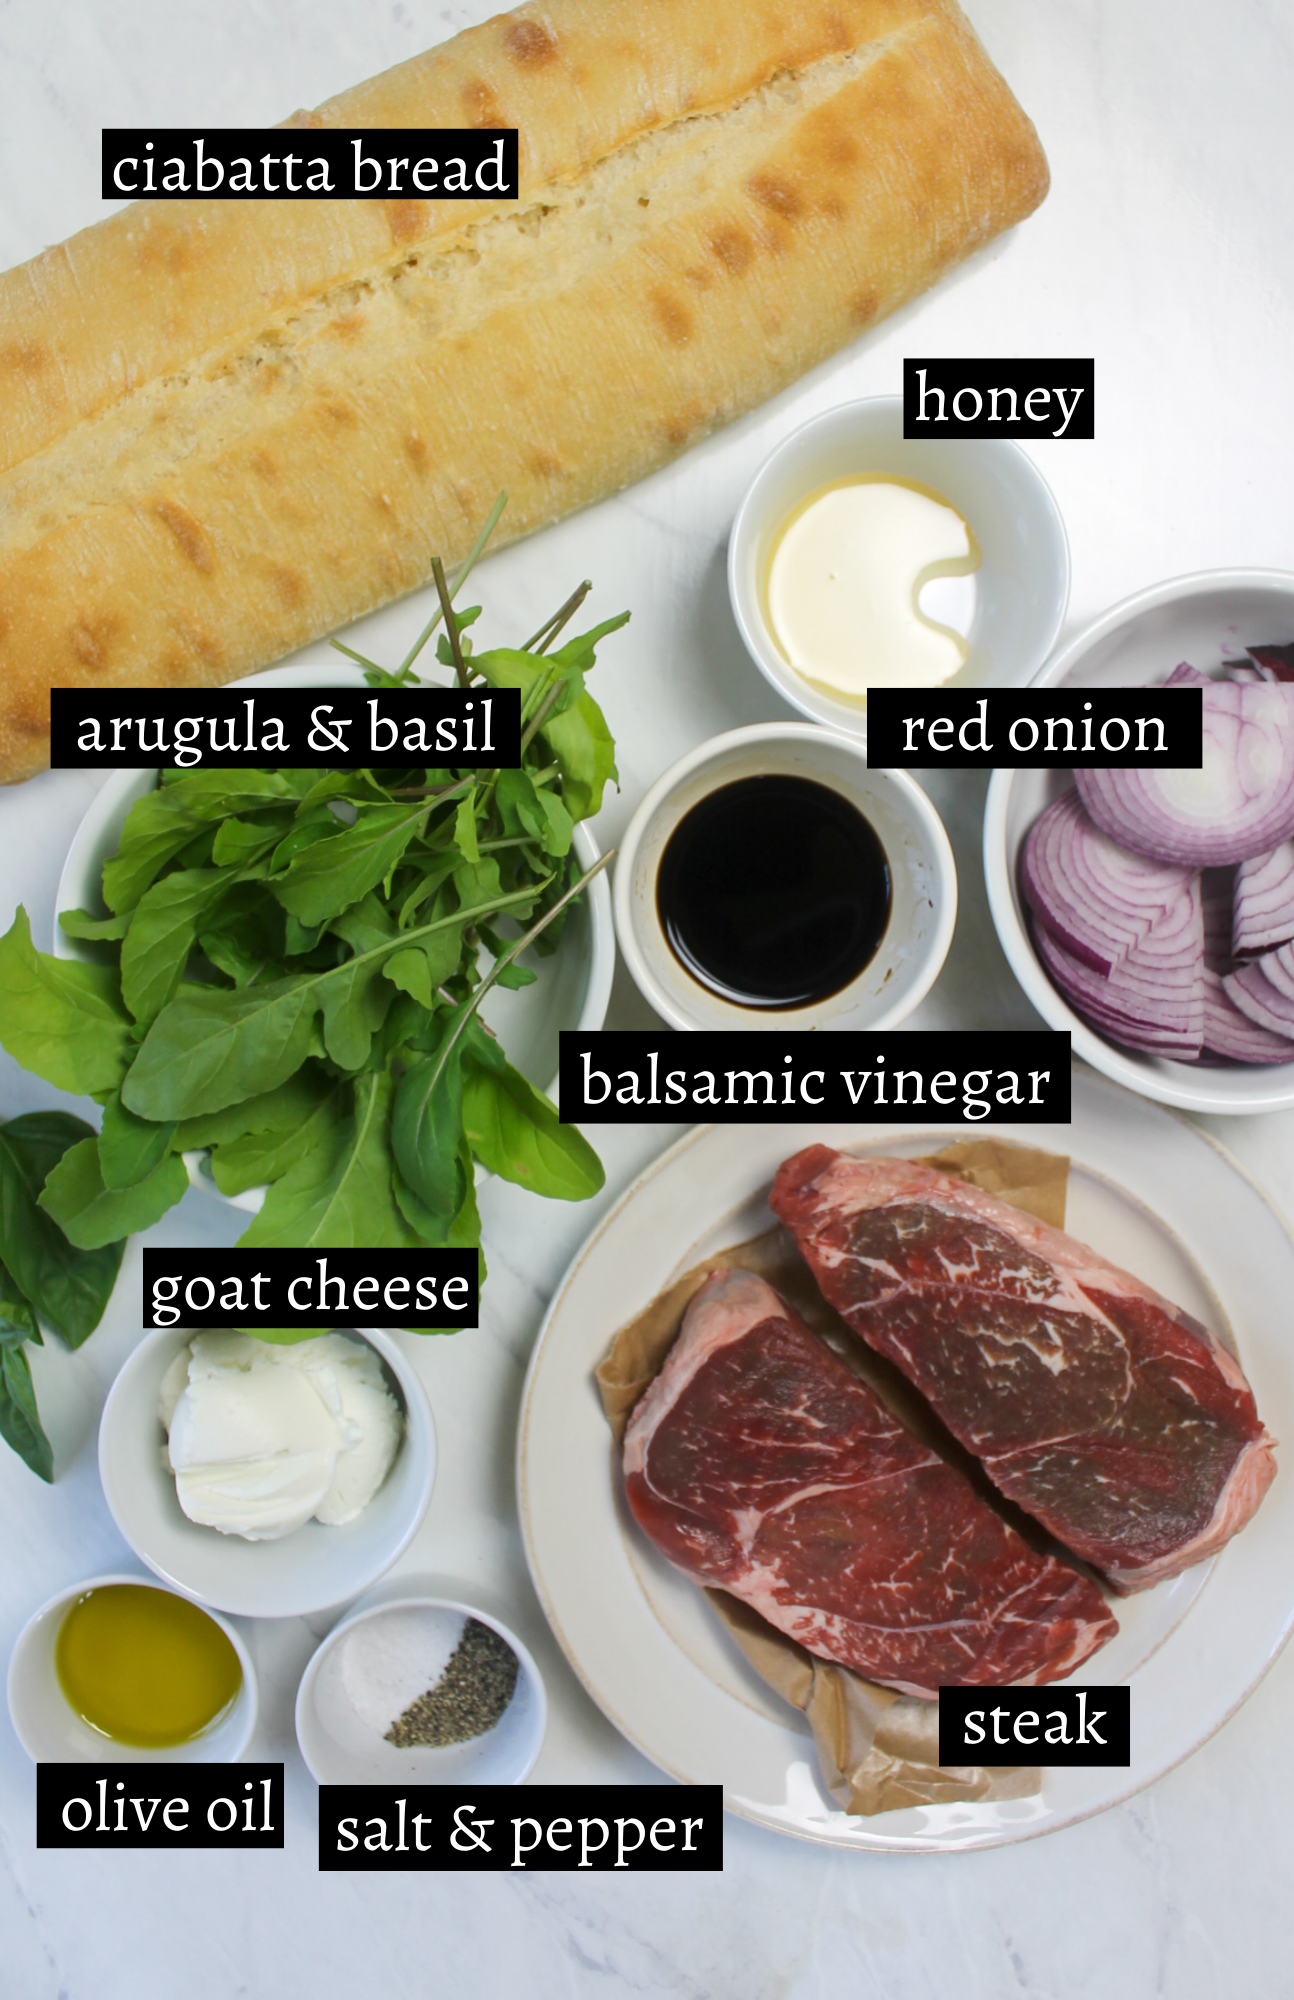 Labeled ingredients for ciabatta steak sandwiches with balsamic onions.